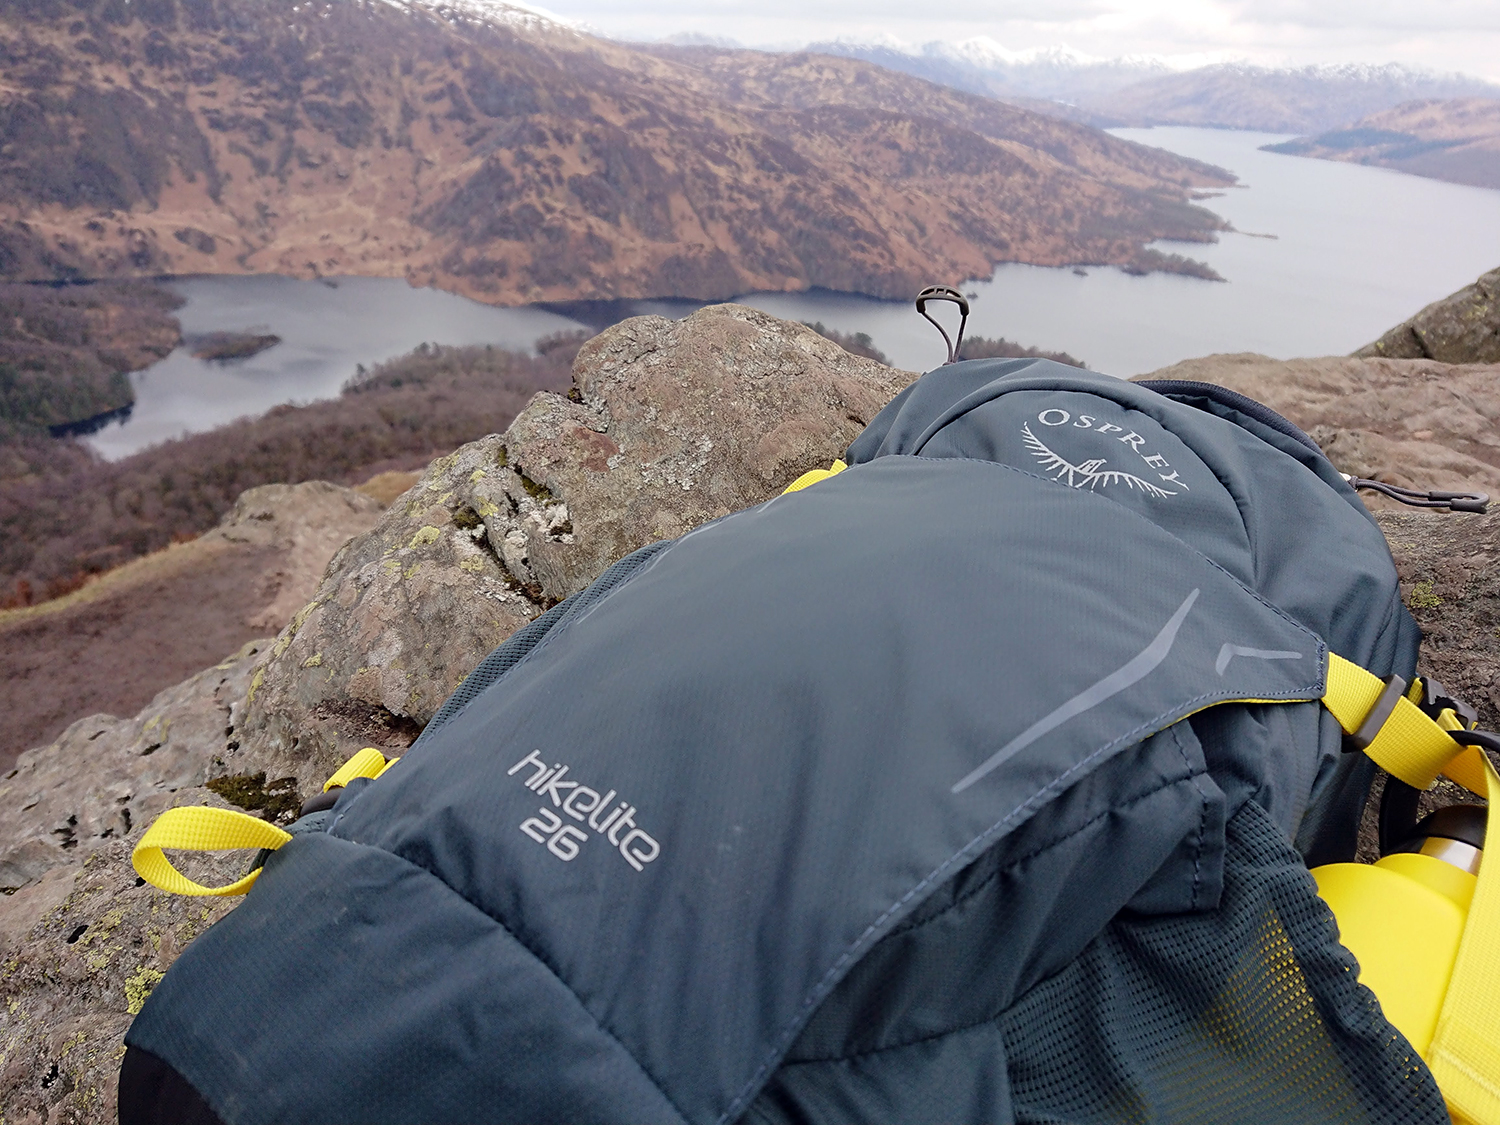 GEAR Hill Walking With The Osprey Hikelite 26 Backpack